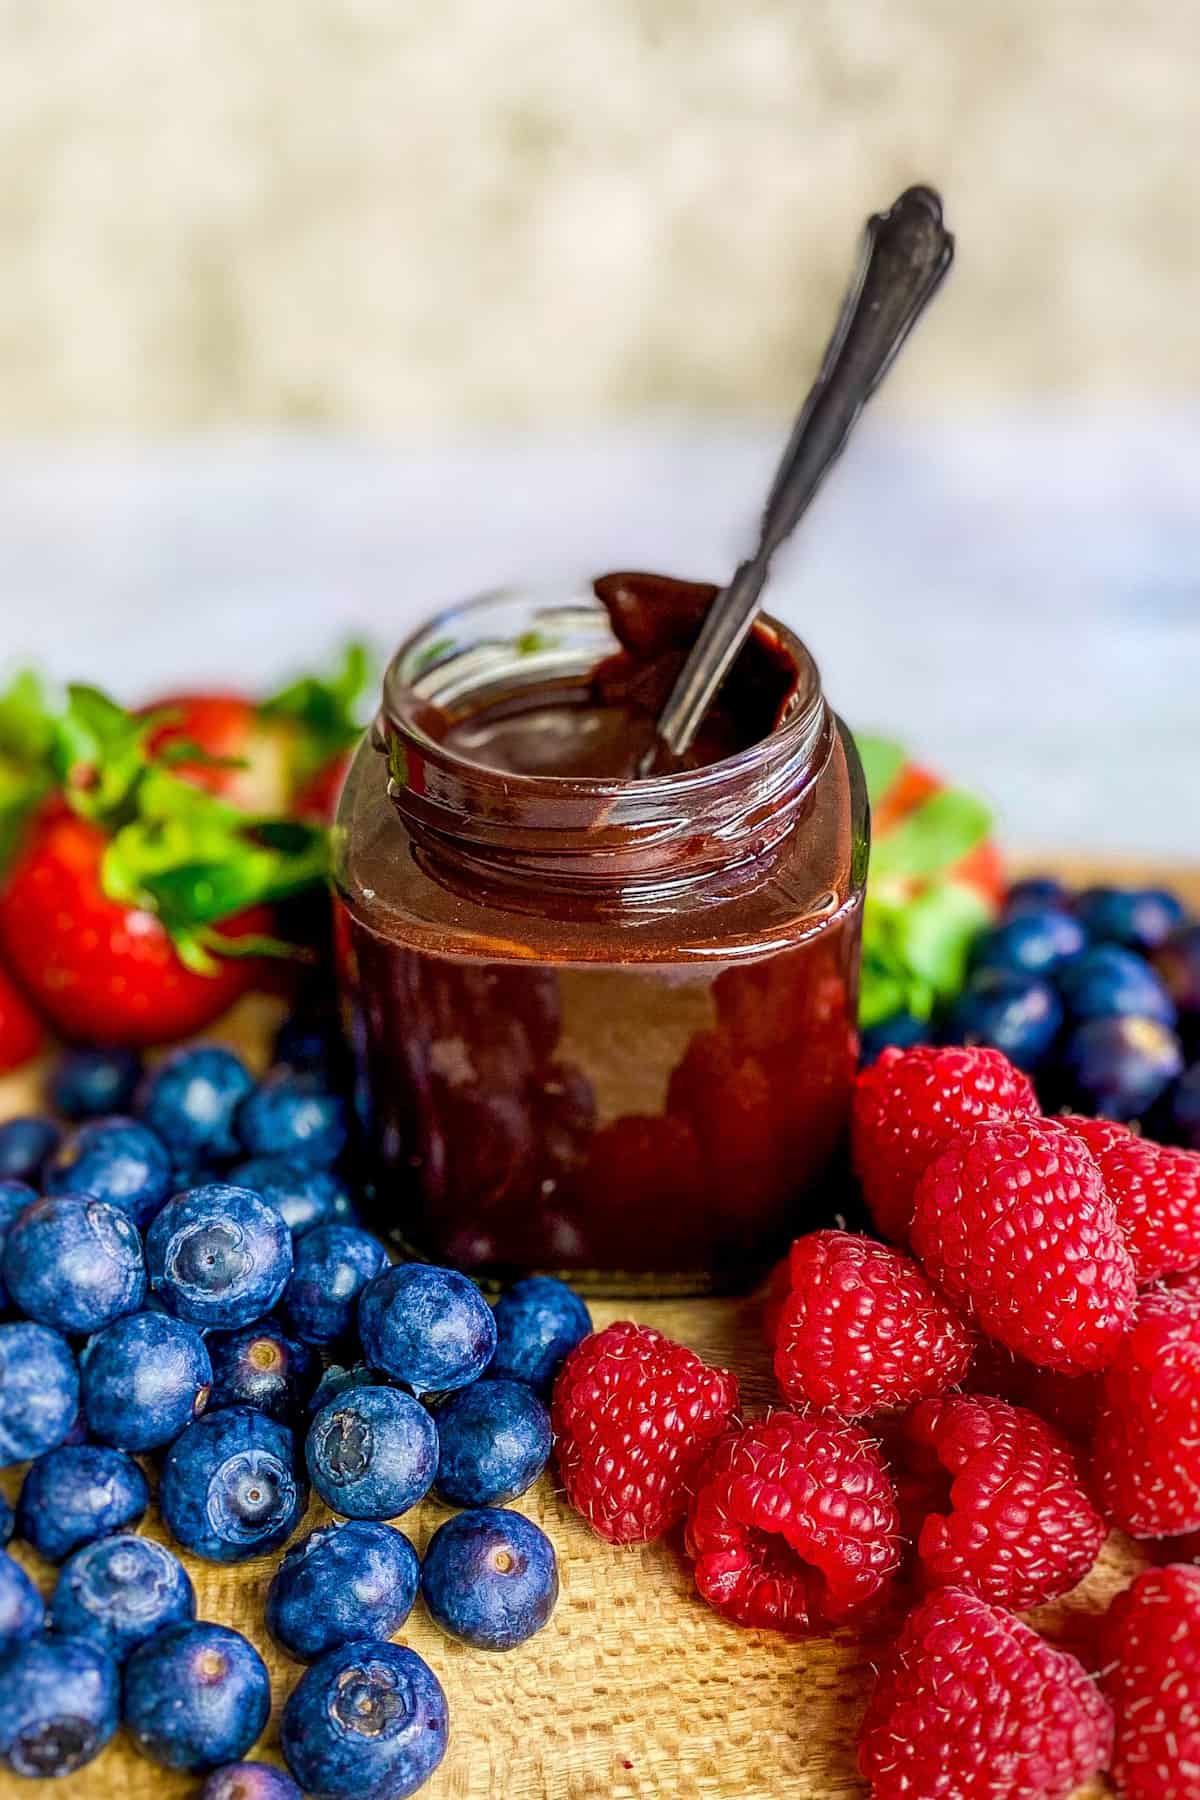 Vegan chocolate syrup in a jar surrounded by berries.